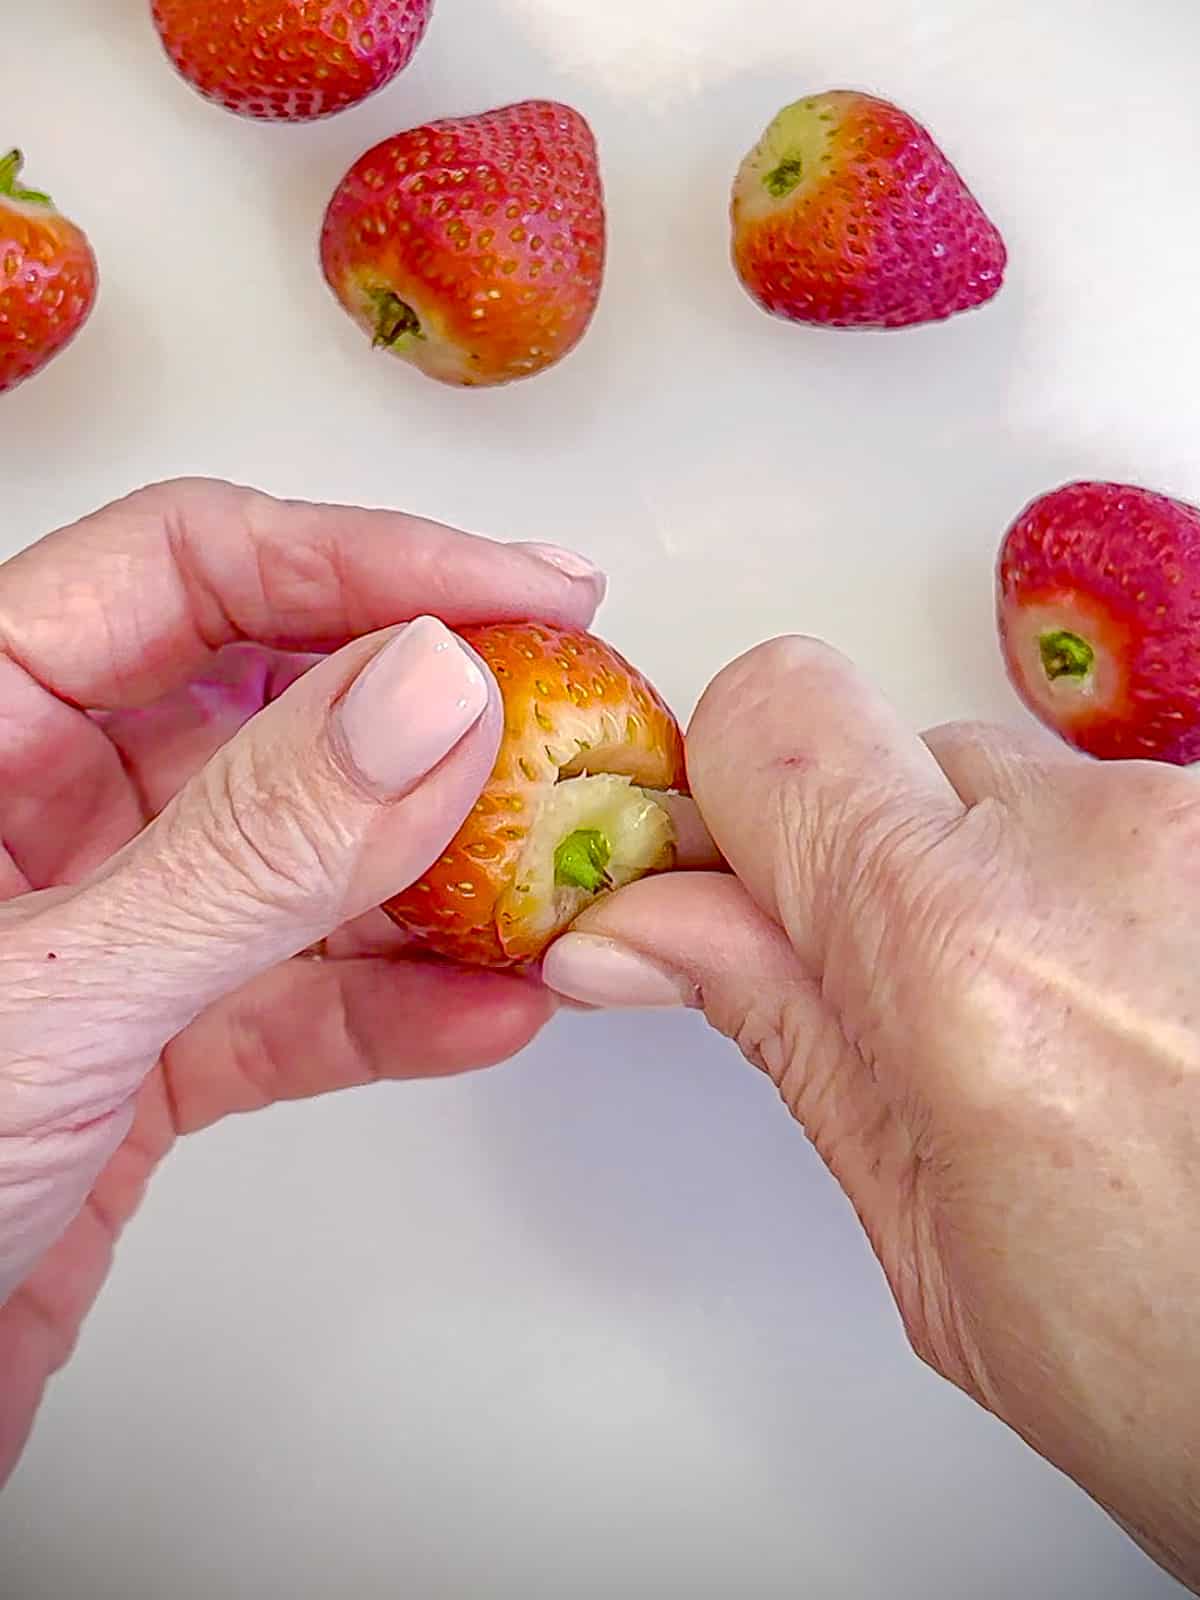 Using a paring knife to hull a strawberry.